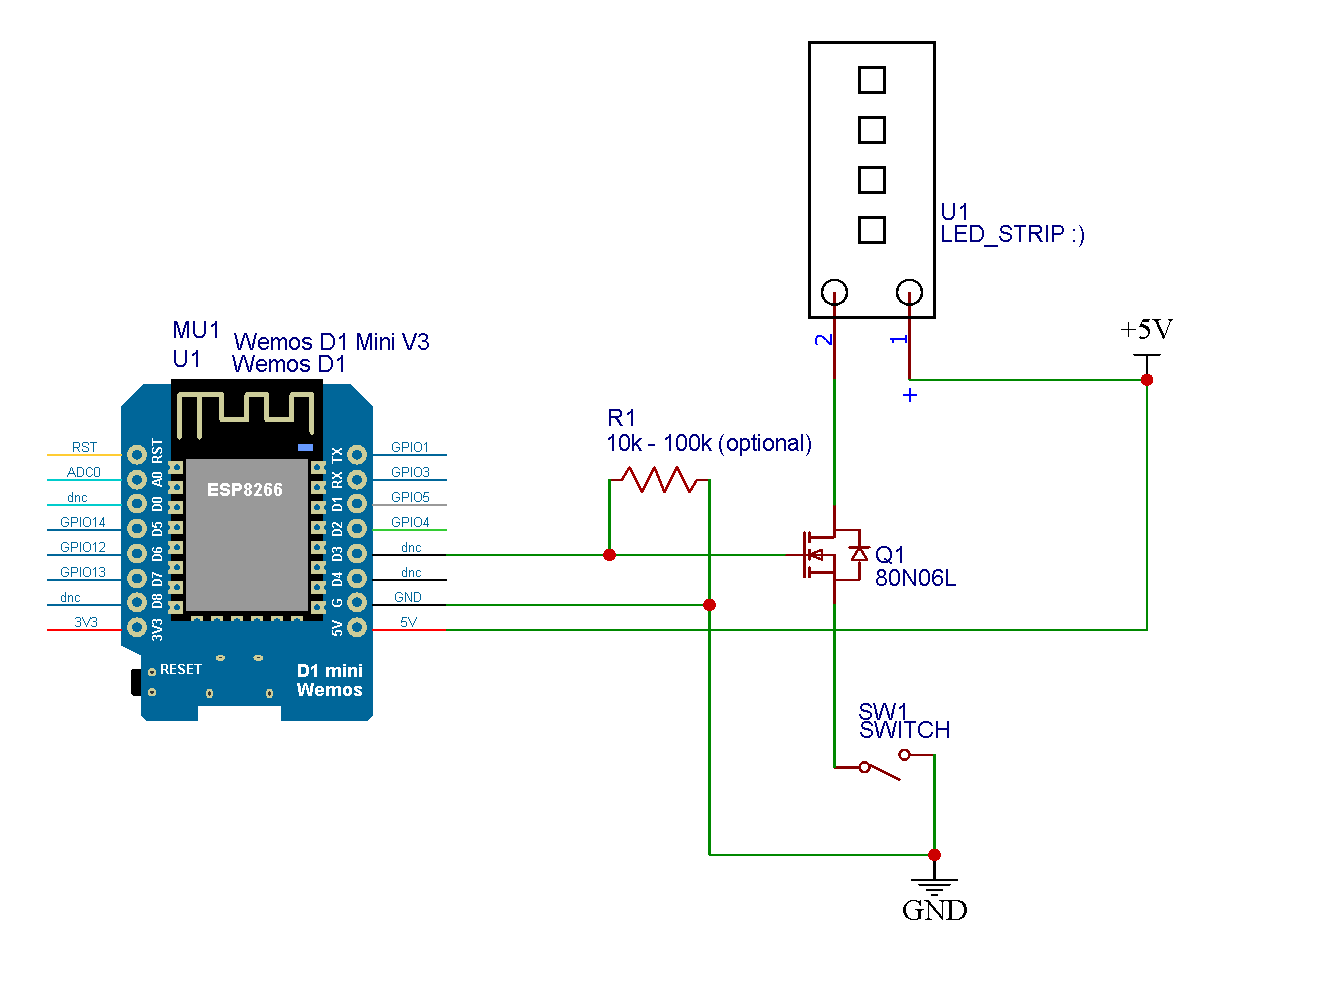 Schematic diagram of LED Strip connected to ESP8266 with MOSFET control and a 2-pin SPST rocker switch